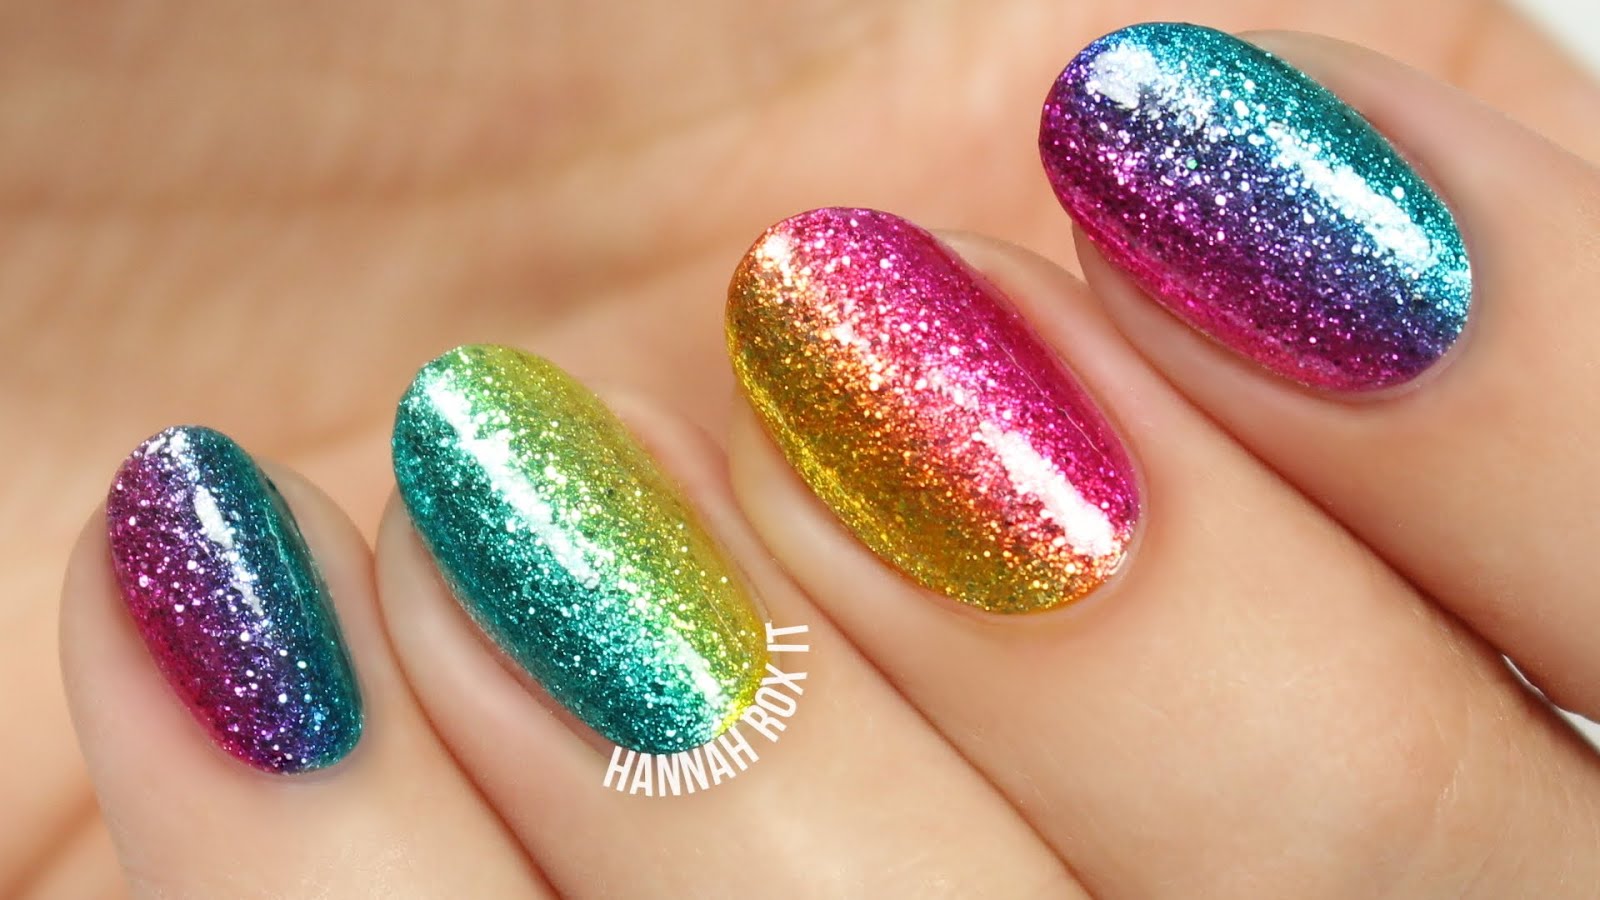 6. Rainbow Marble Nails - wide 7